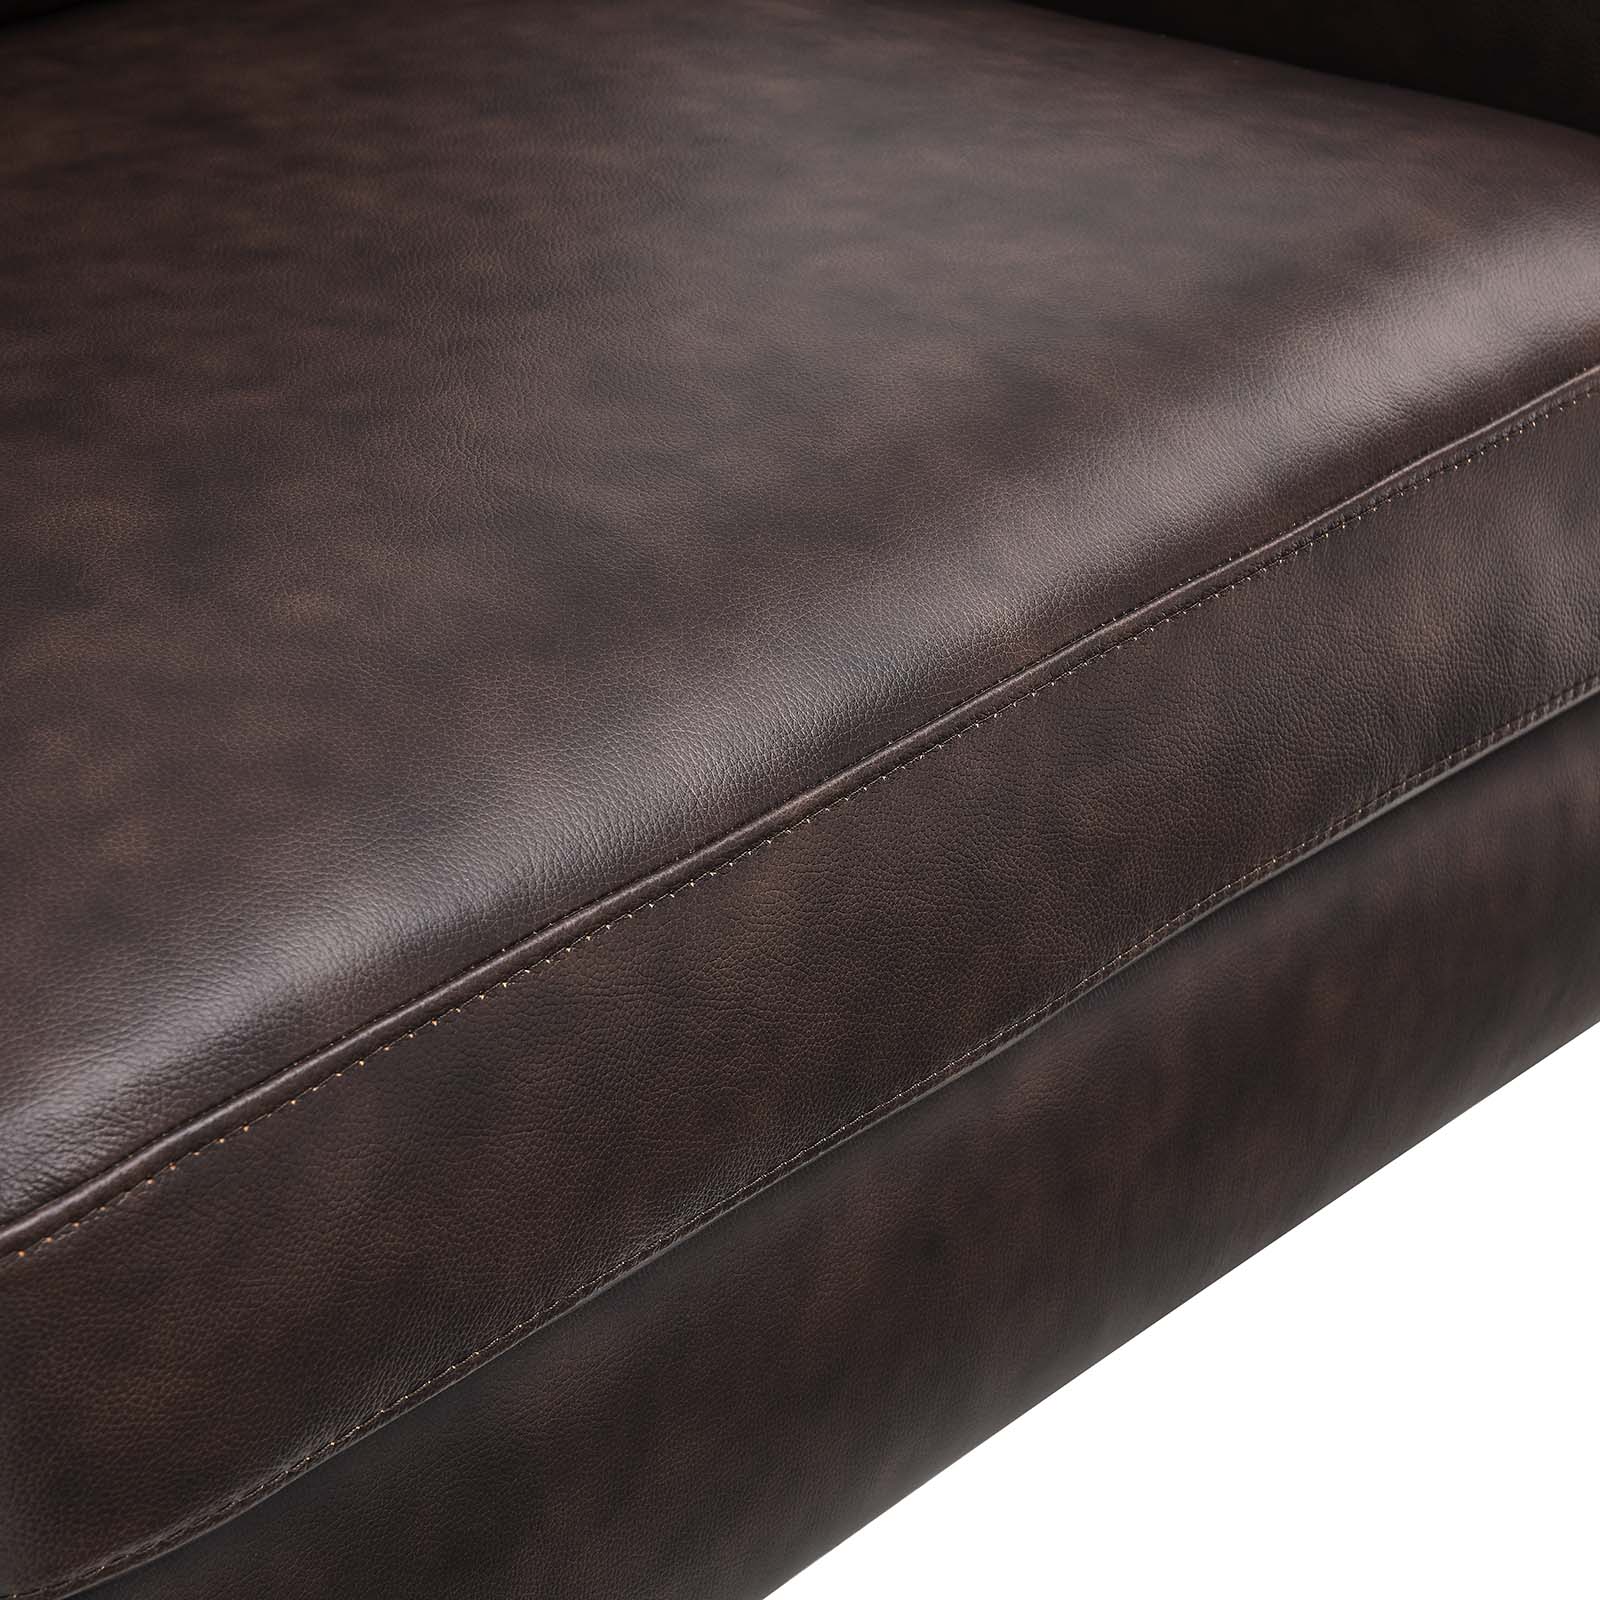 Modway Loveseats - Corland Leather Loveseat Brown